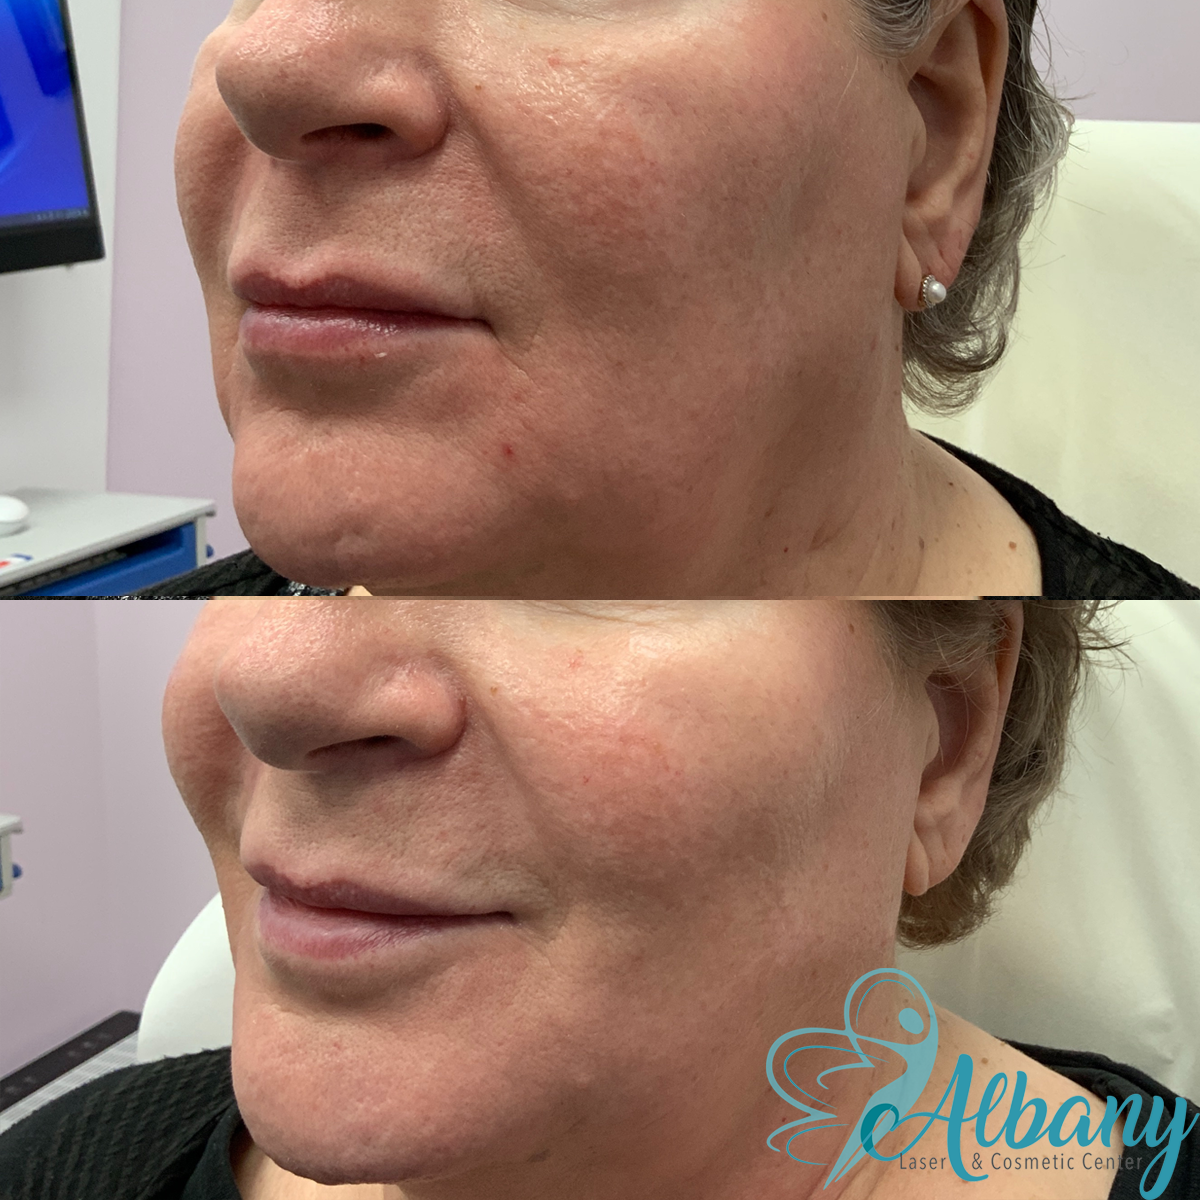 Before and after image of a woman's face showing the left side, highlighting improvements in skin texture and reduction in wrinkles after Bellafill fillers treatment at Albany Laser & Cosmetic Center